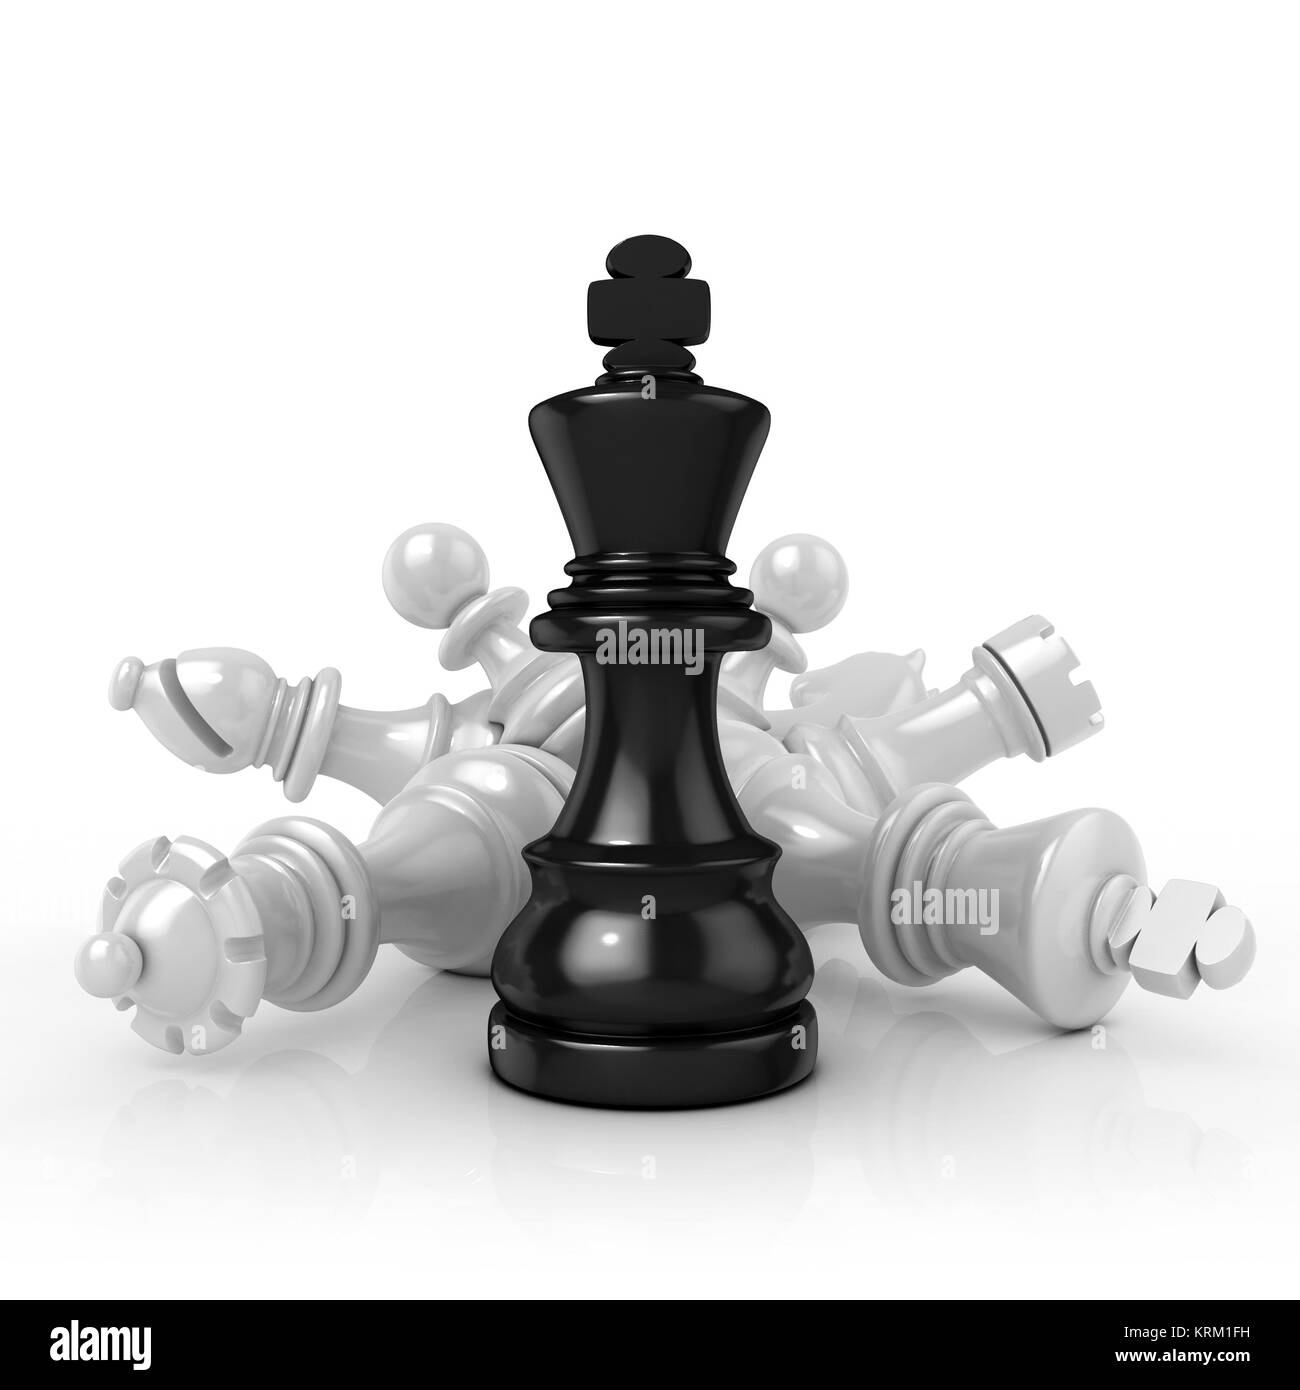 Black King Standing Over Fallen Black Chess Pieces Stock Photo Alamy